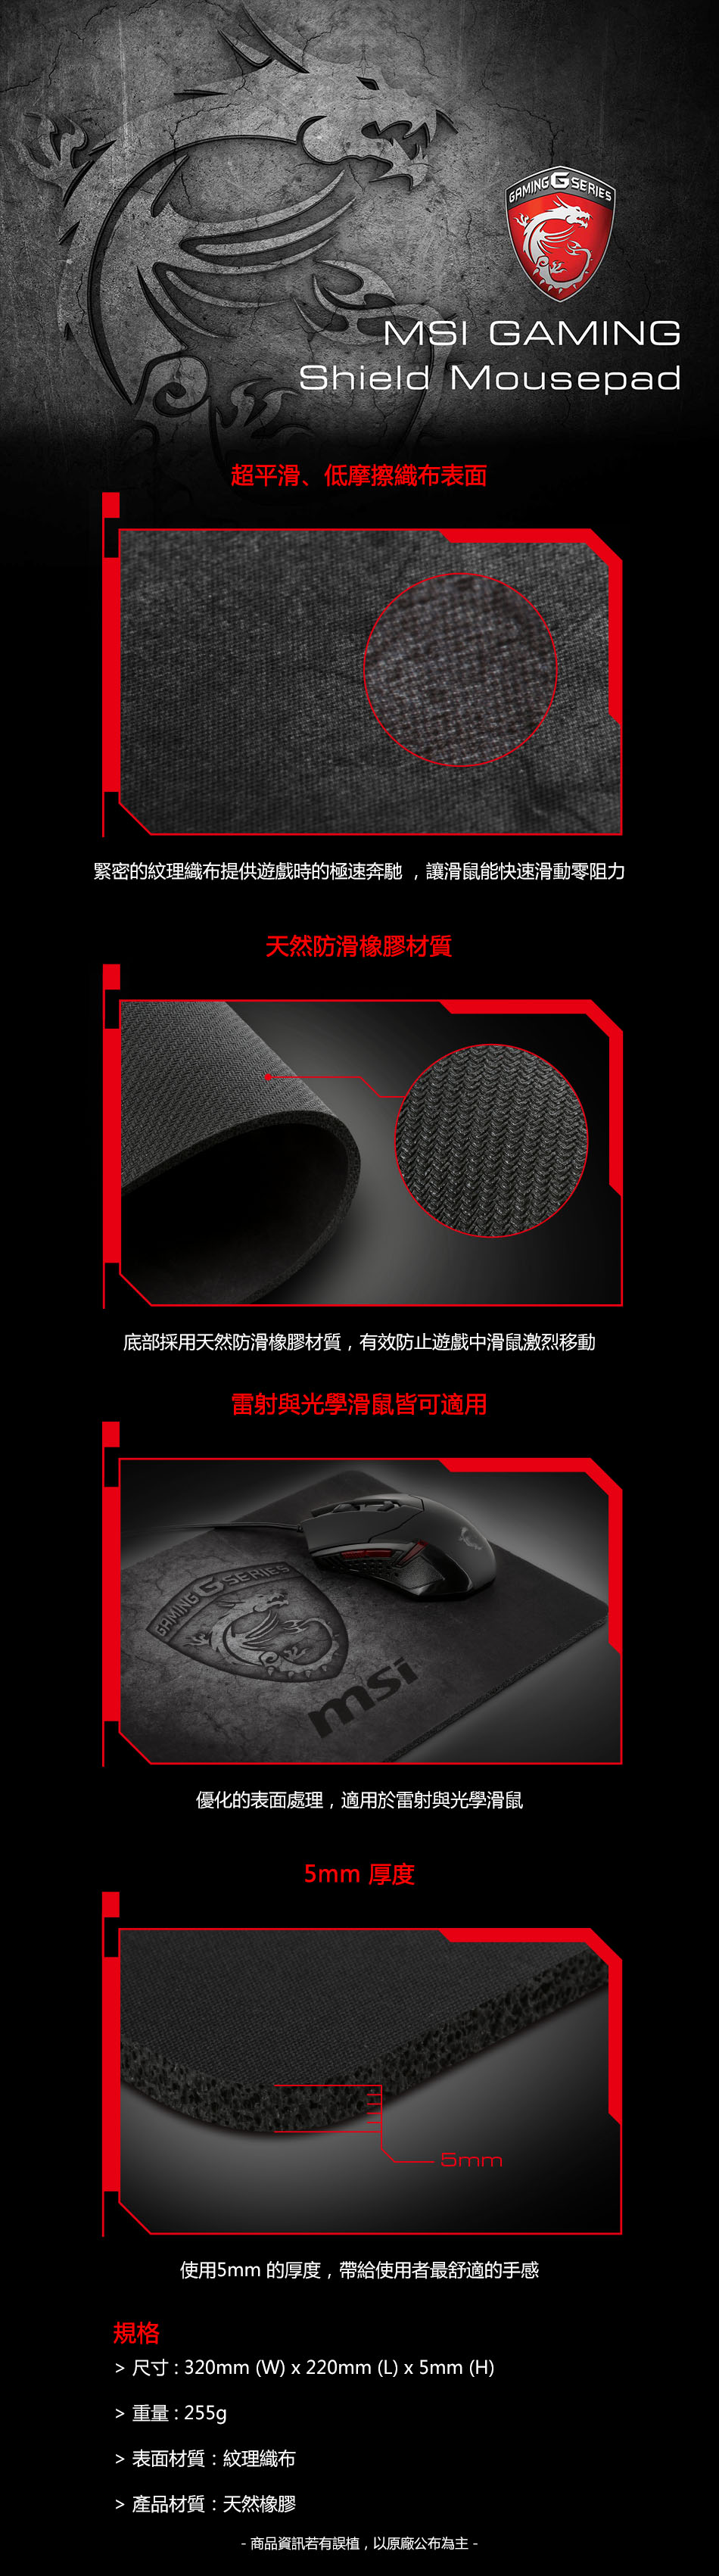 http://image.pcmax.com.tw/mousekeybpards/MSI/Shield%20MousePad.jpg